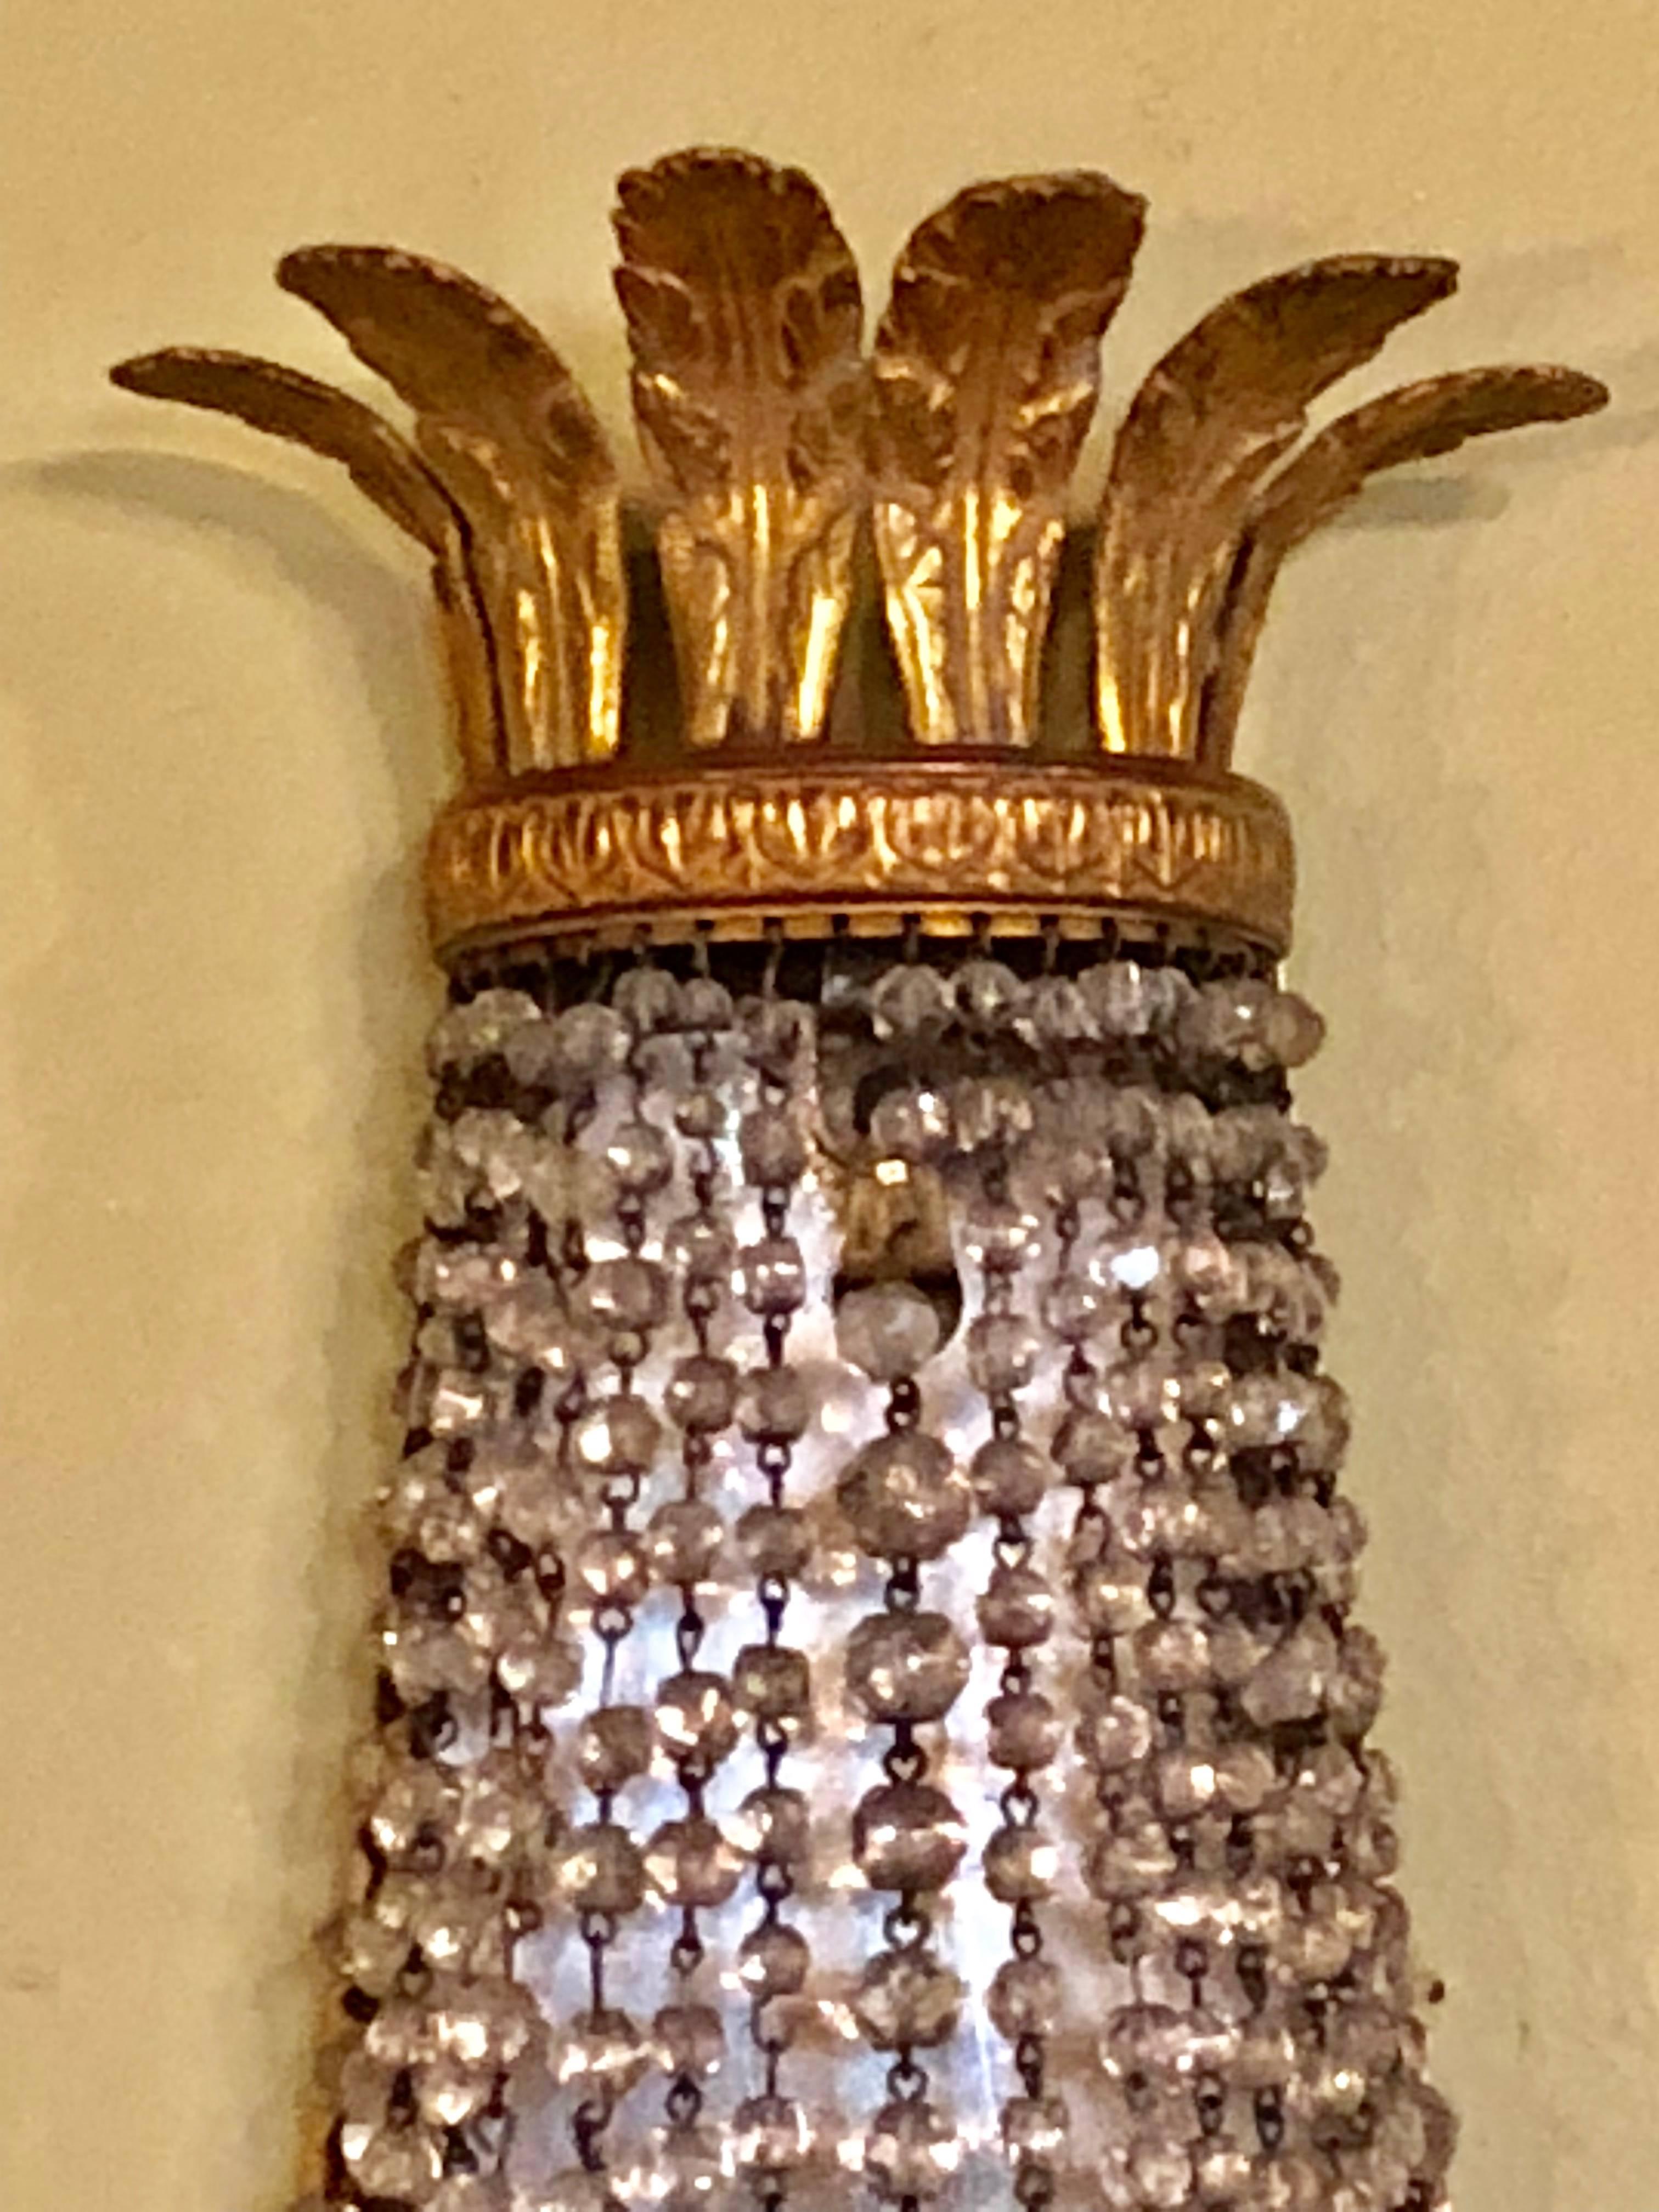 Pair of French wall sconces by niermann weeks each taking three bulbs. In the neoclassical taste with hanging crystals.